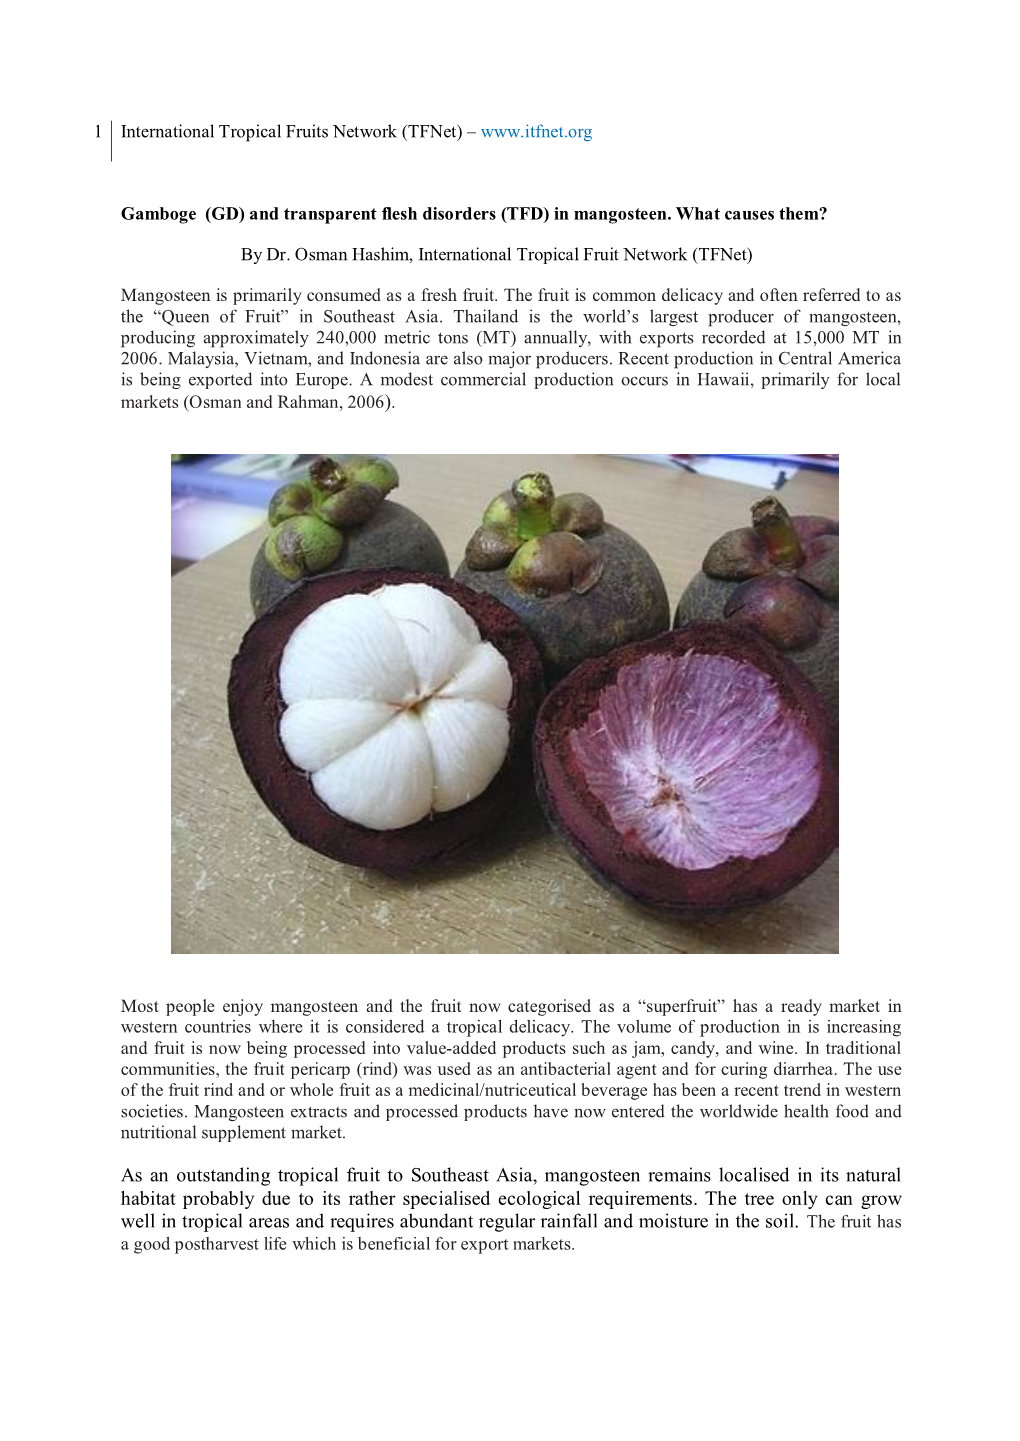 As an Outstanding Tropical Fruit to Southeast Asia, Mangosteen Remains Localised in Its Natural Habitat Probably Due to Its Rather Specialised Ecological Requirements